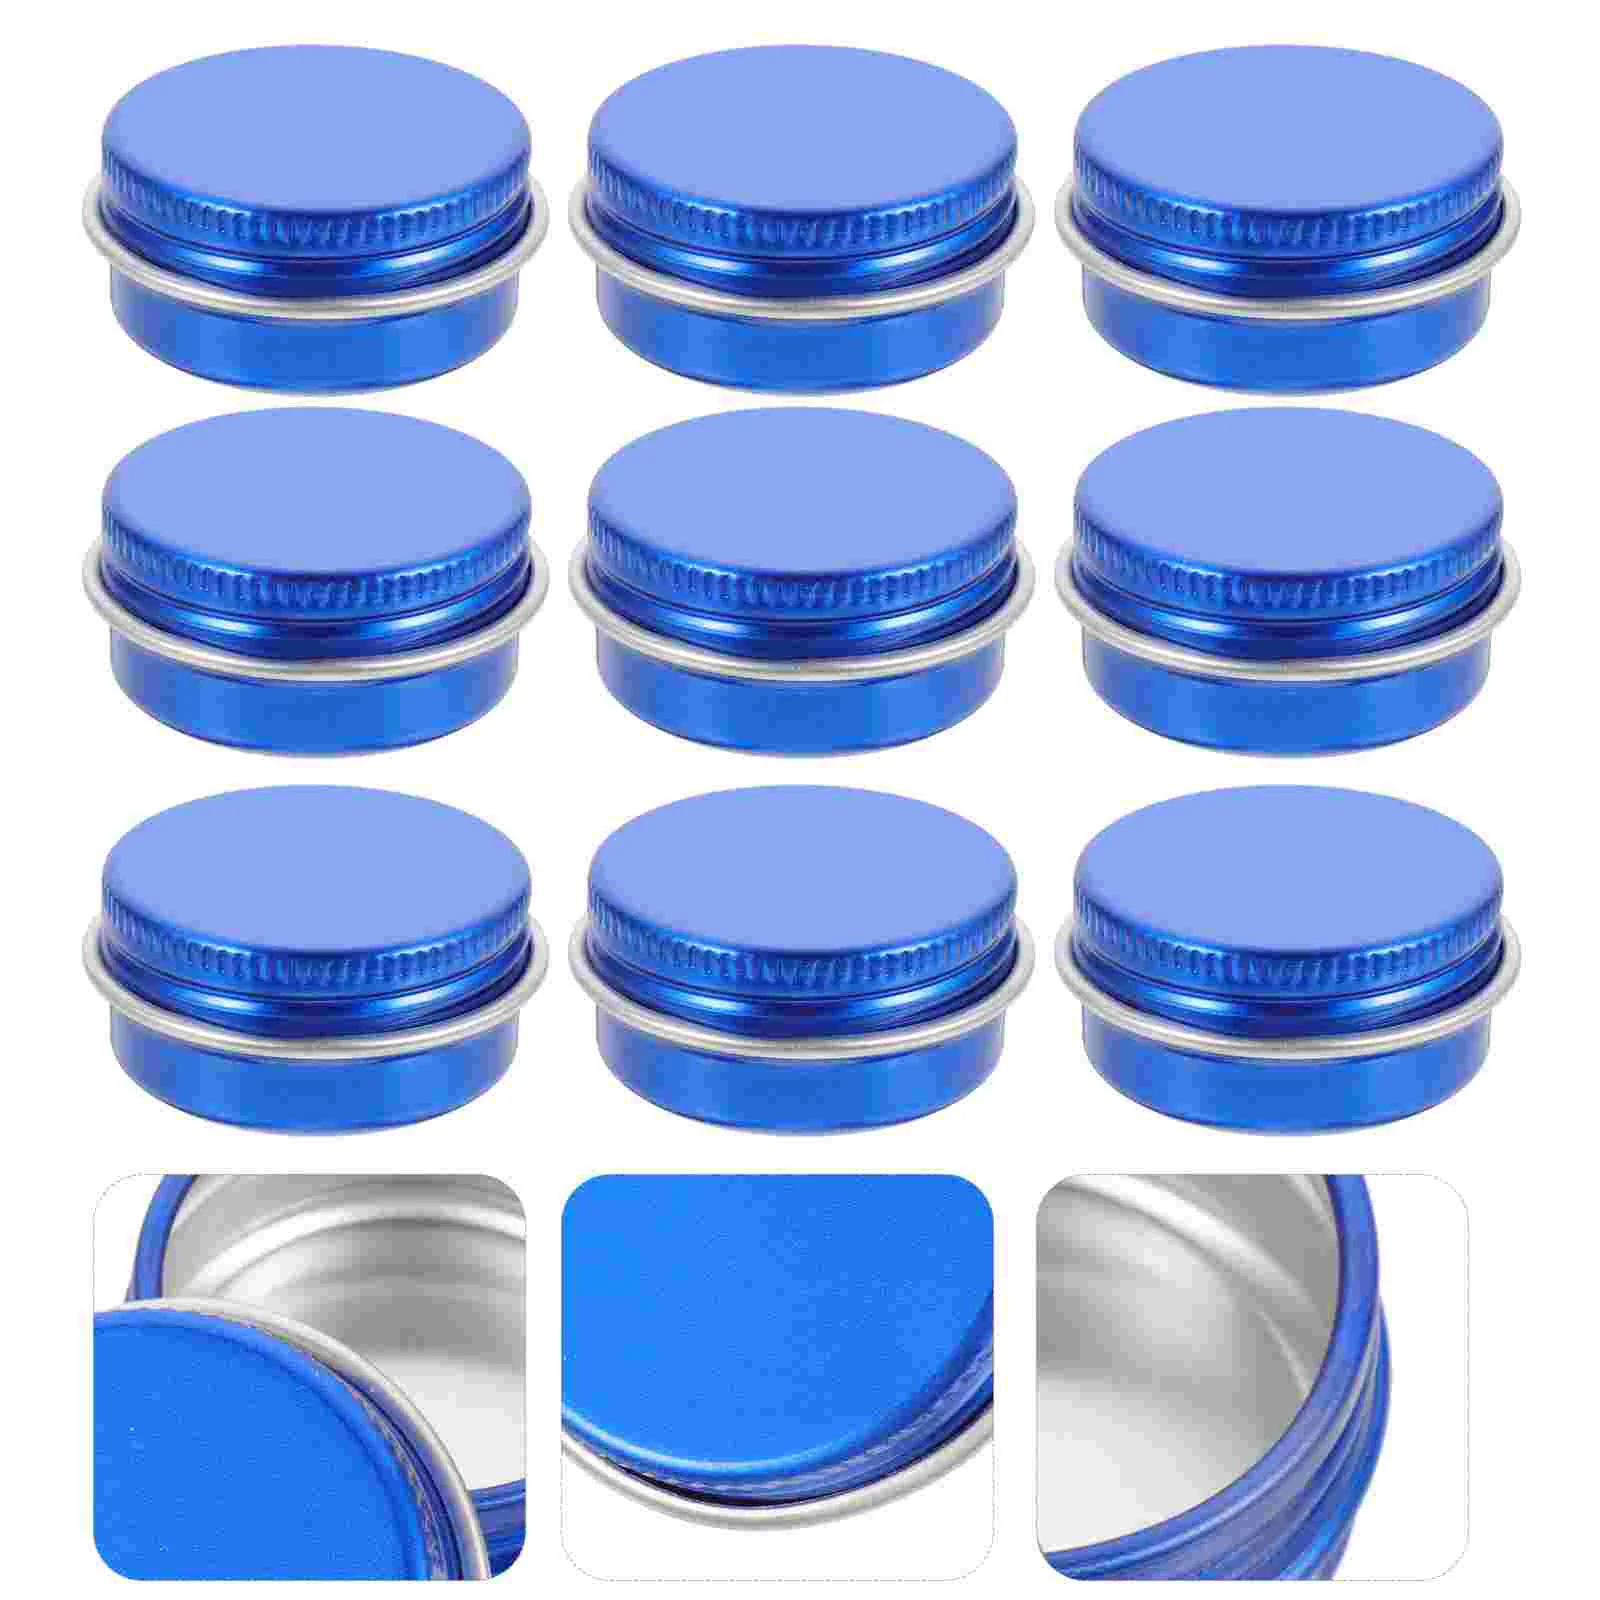 

Tin Tins Box Jar Lip Round Sealed Screw Wax Cookie Facial Cream Candy Candlemaking Balm Jars Gift Empty Lids Metal Cans